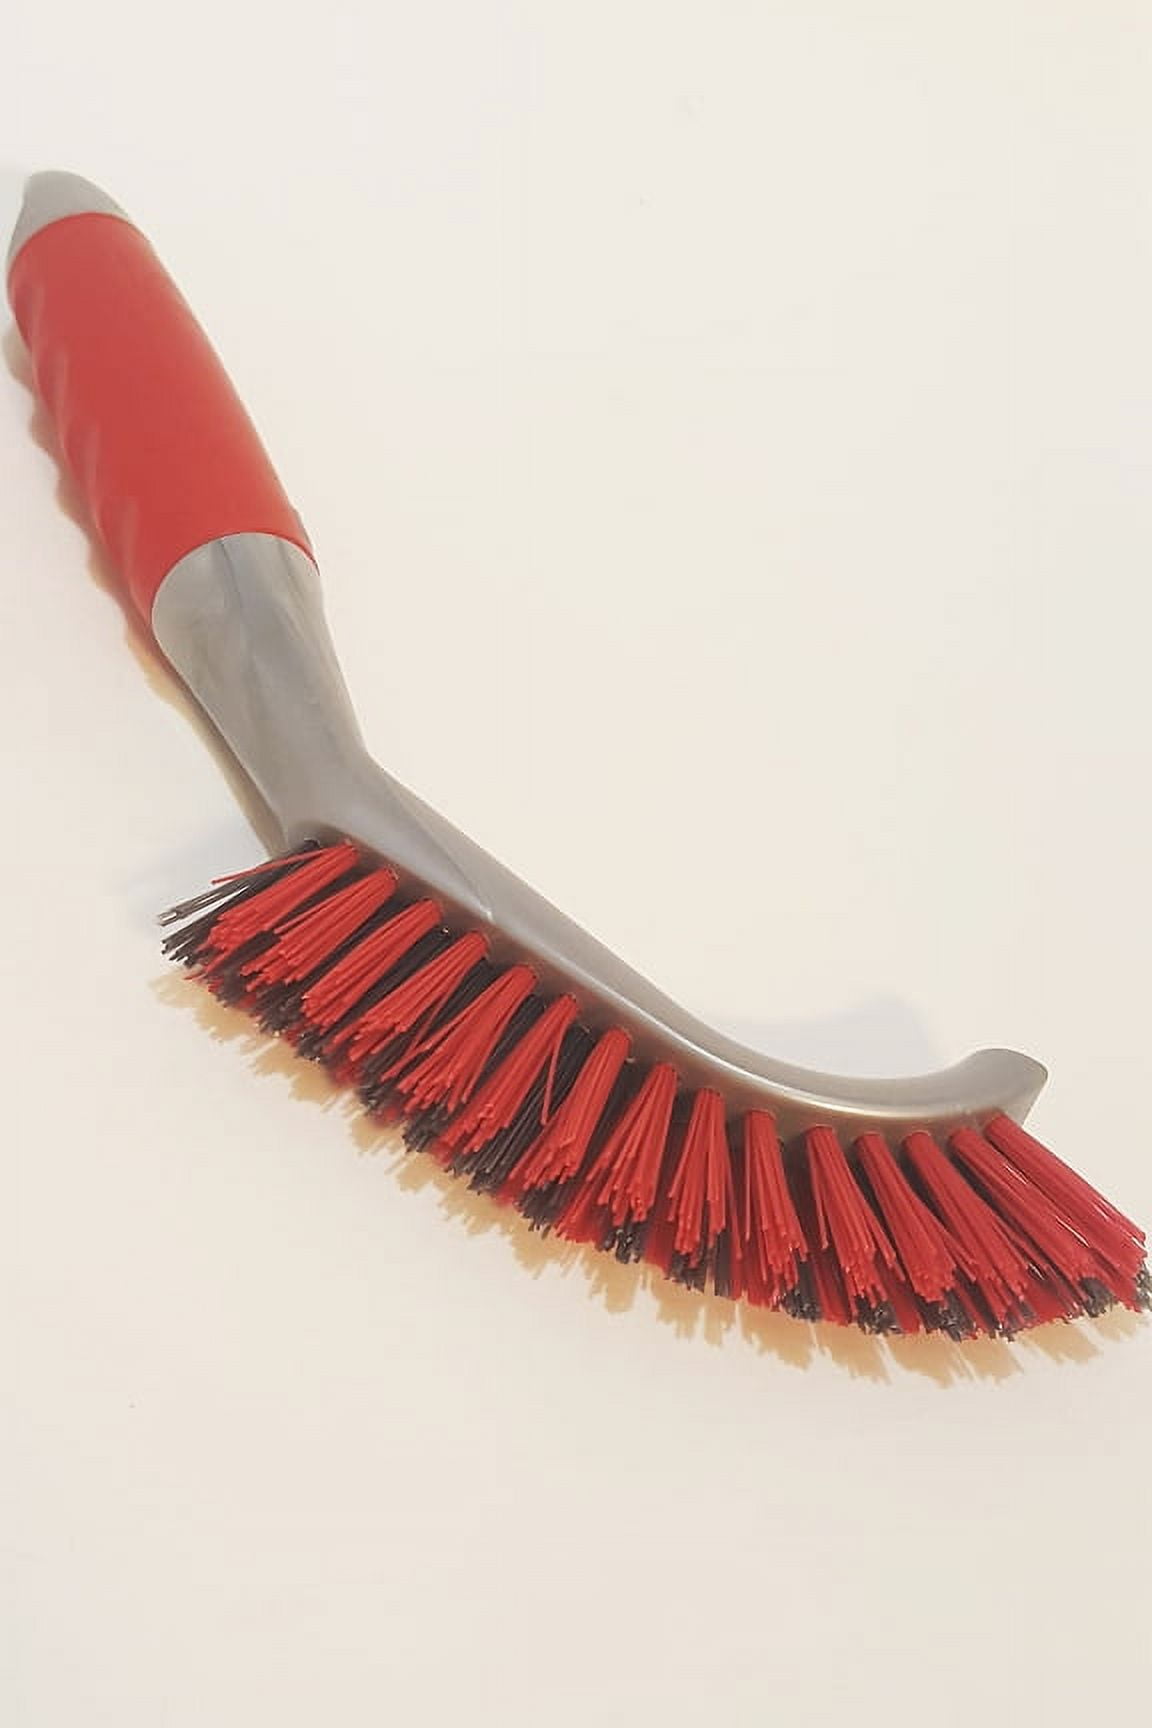 Raptor Tile and Grout Hand Brush